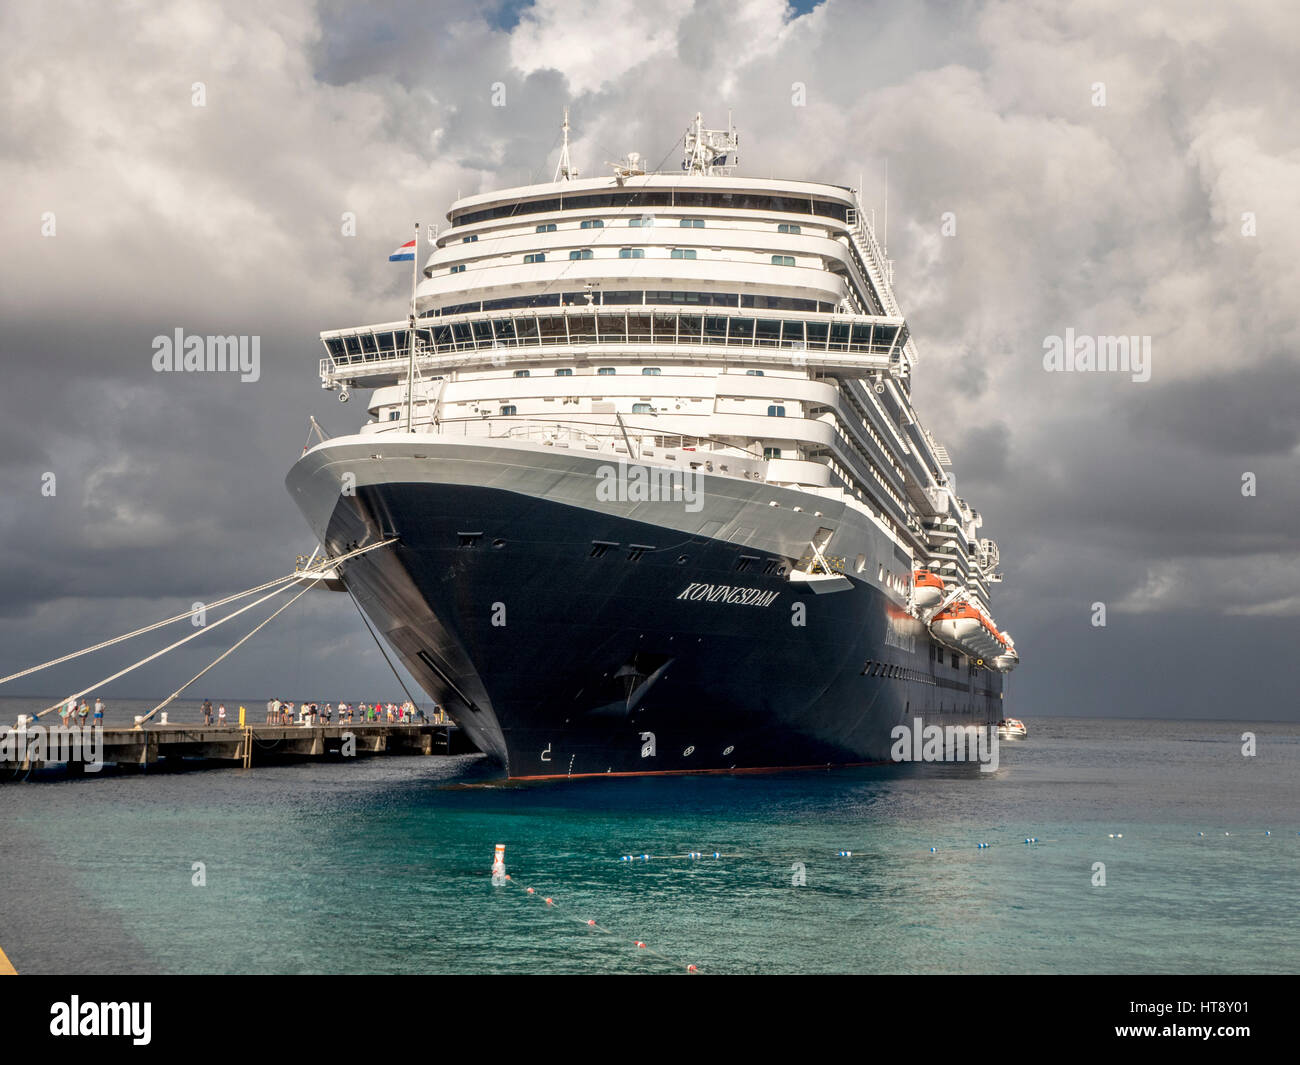 The MS Nieuw Amsterdam And MS Koningsdam At The Cruis Ship Centre In Grand Turk, Turks And Caicos Islands Stock Photo